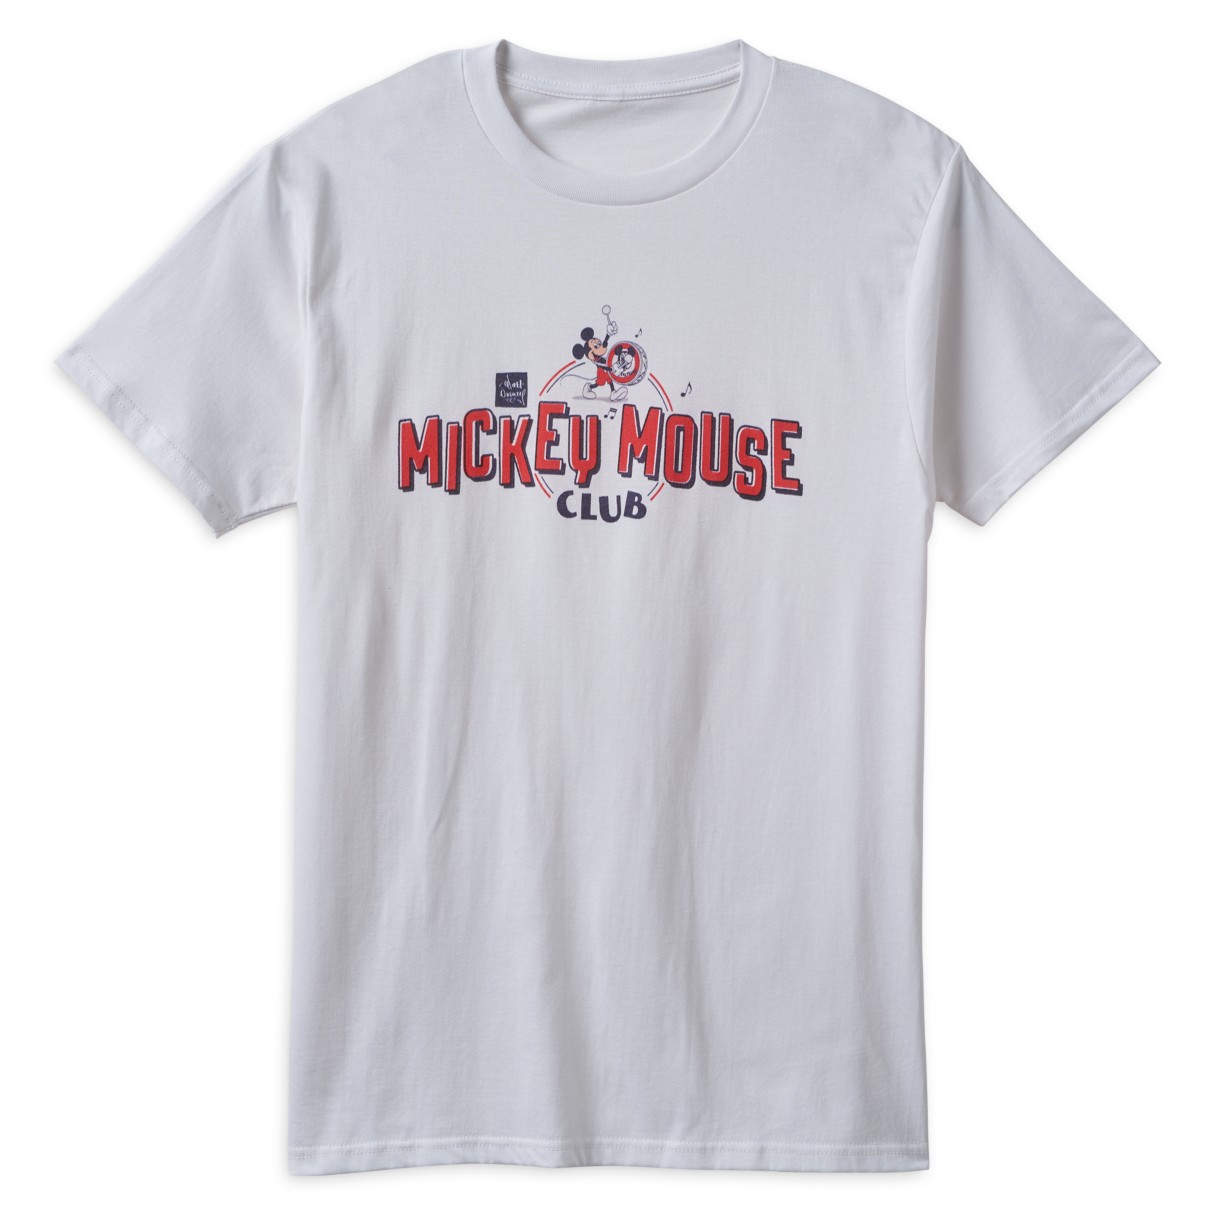 The Mickey Mouse Club T-Shirt for Adults